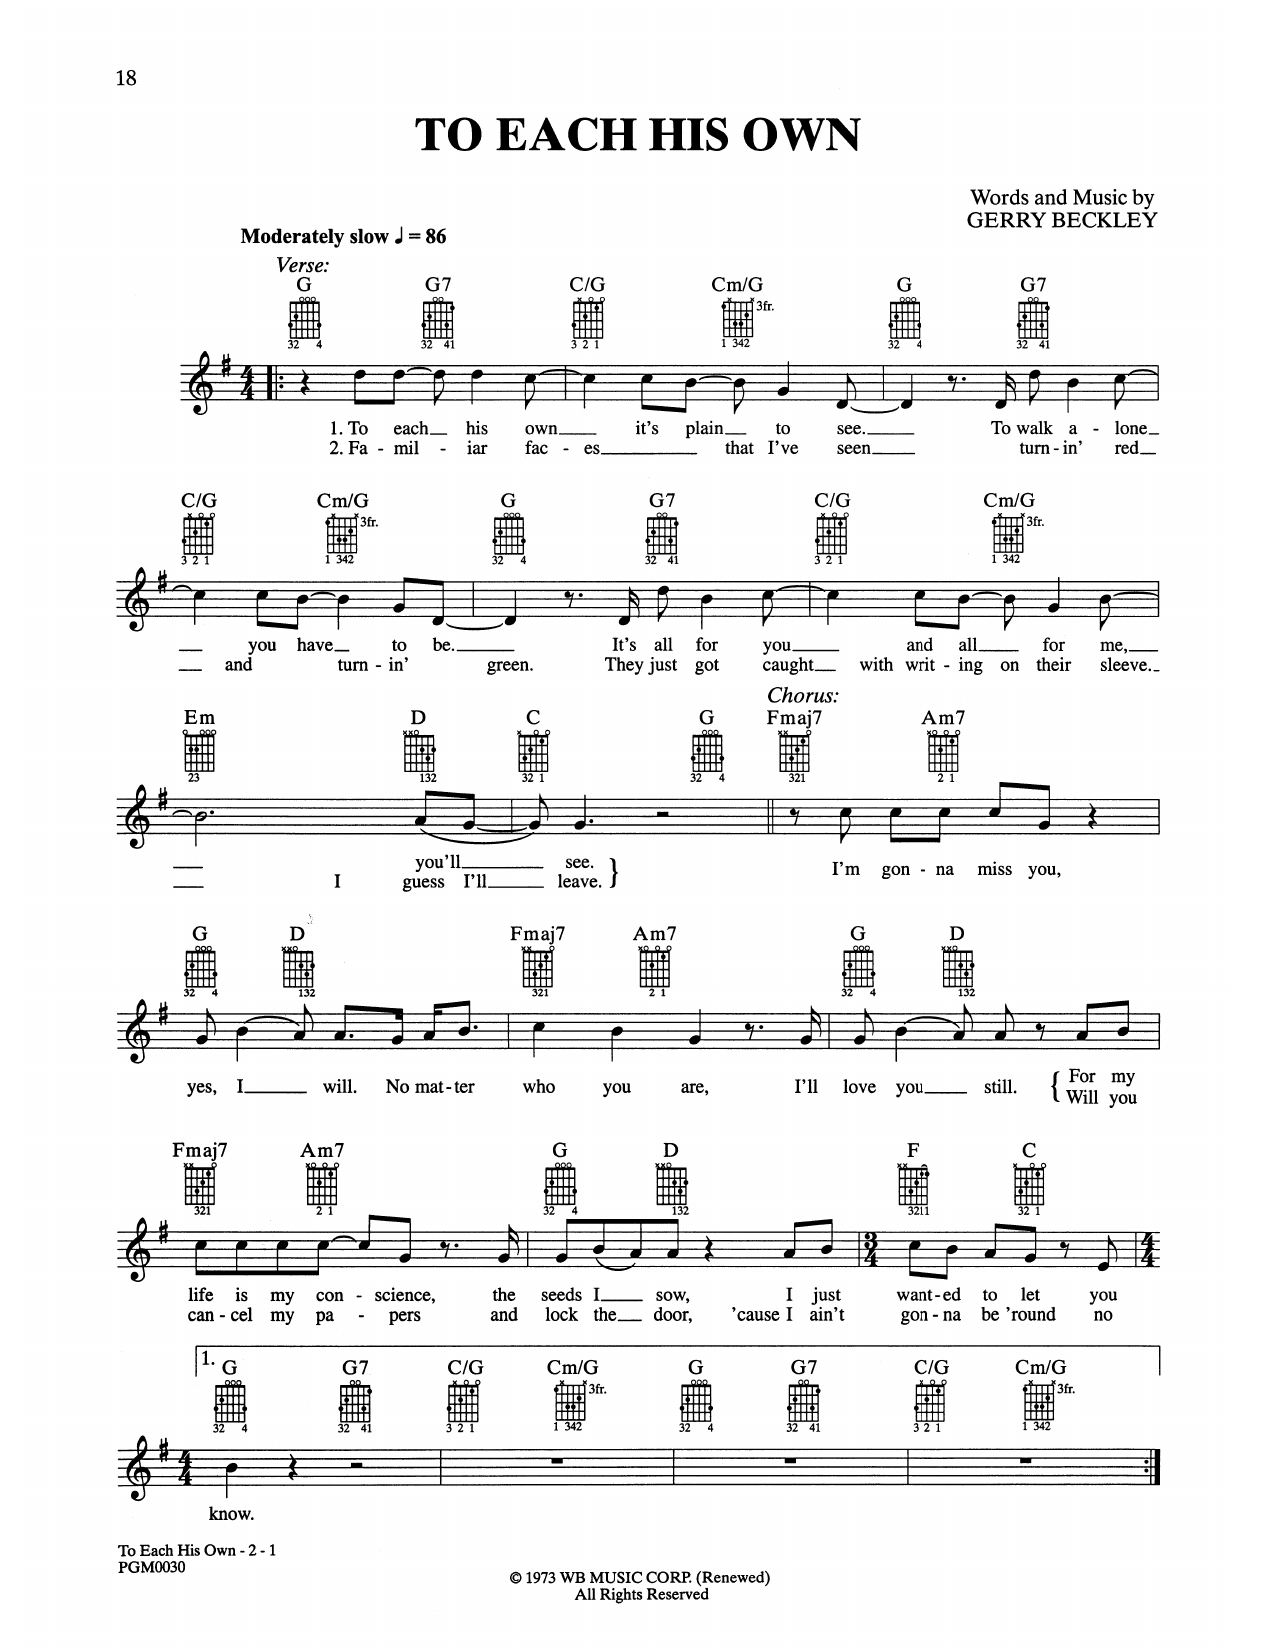 Download America To Each His Own Sheet Music